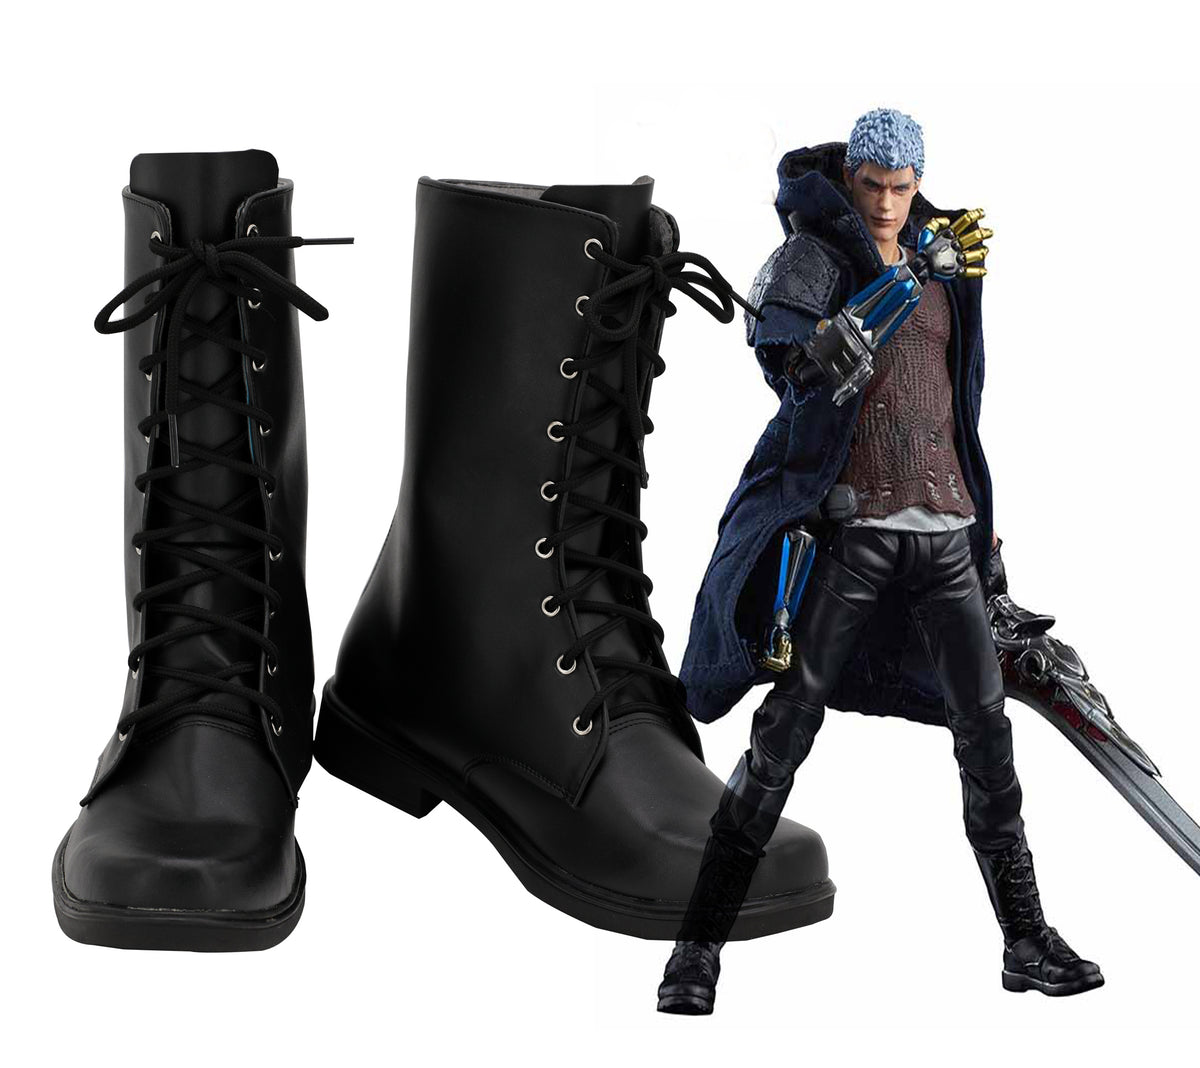 DMC5 Devil May Cry 5 Devil May Cry V Nero Cosplay Schuhe Stiefel